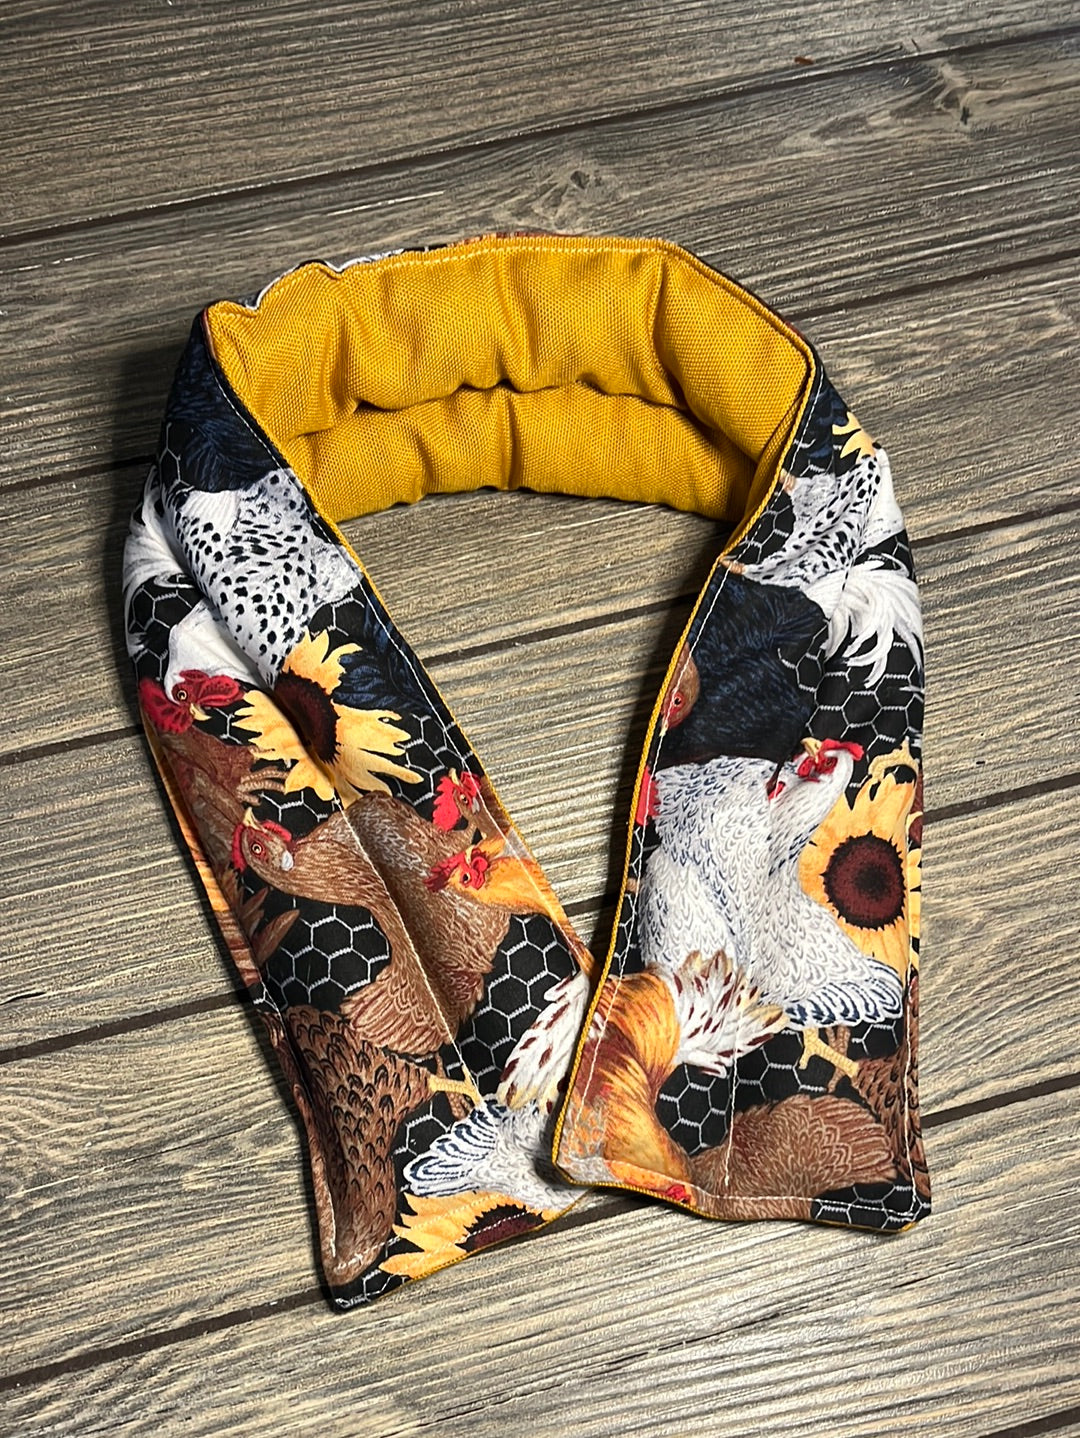 Heat Therapy Rice Bag, EmJ Neck Wrap, Chicken/Sunflowers